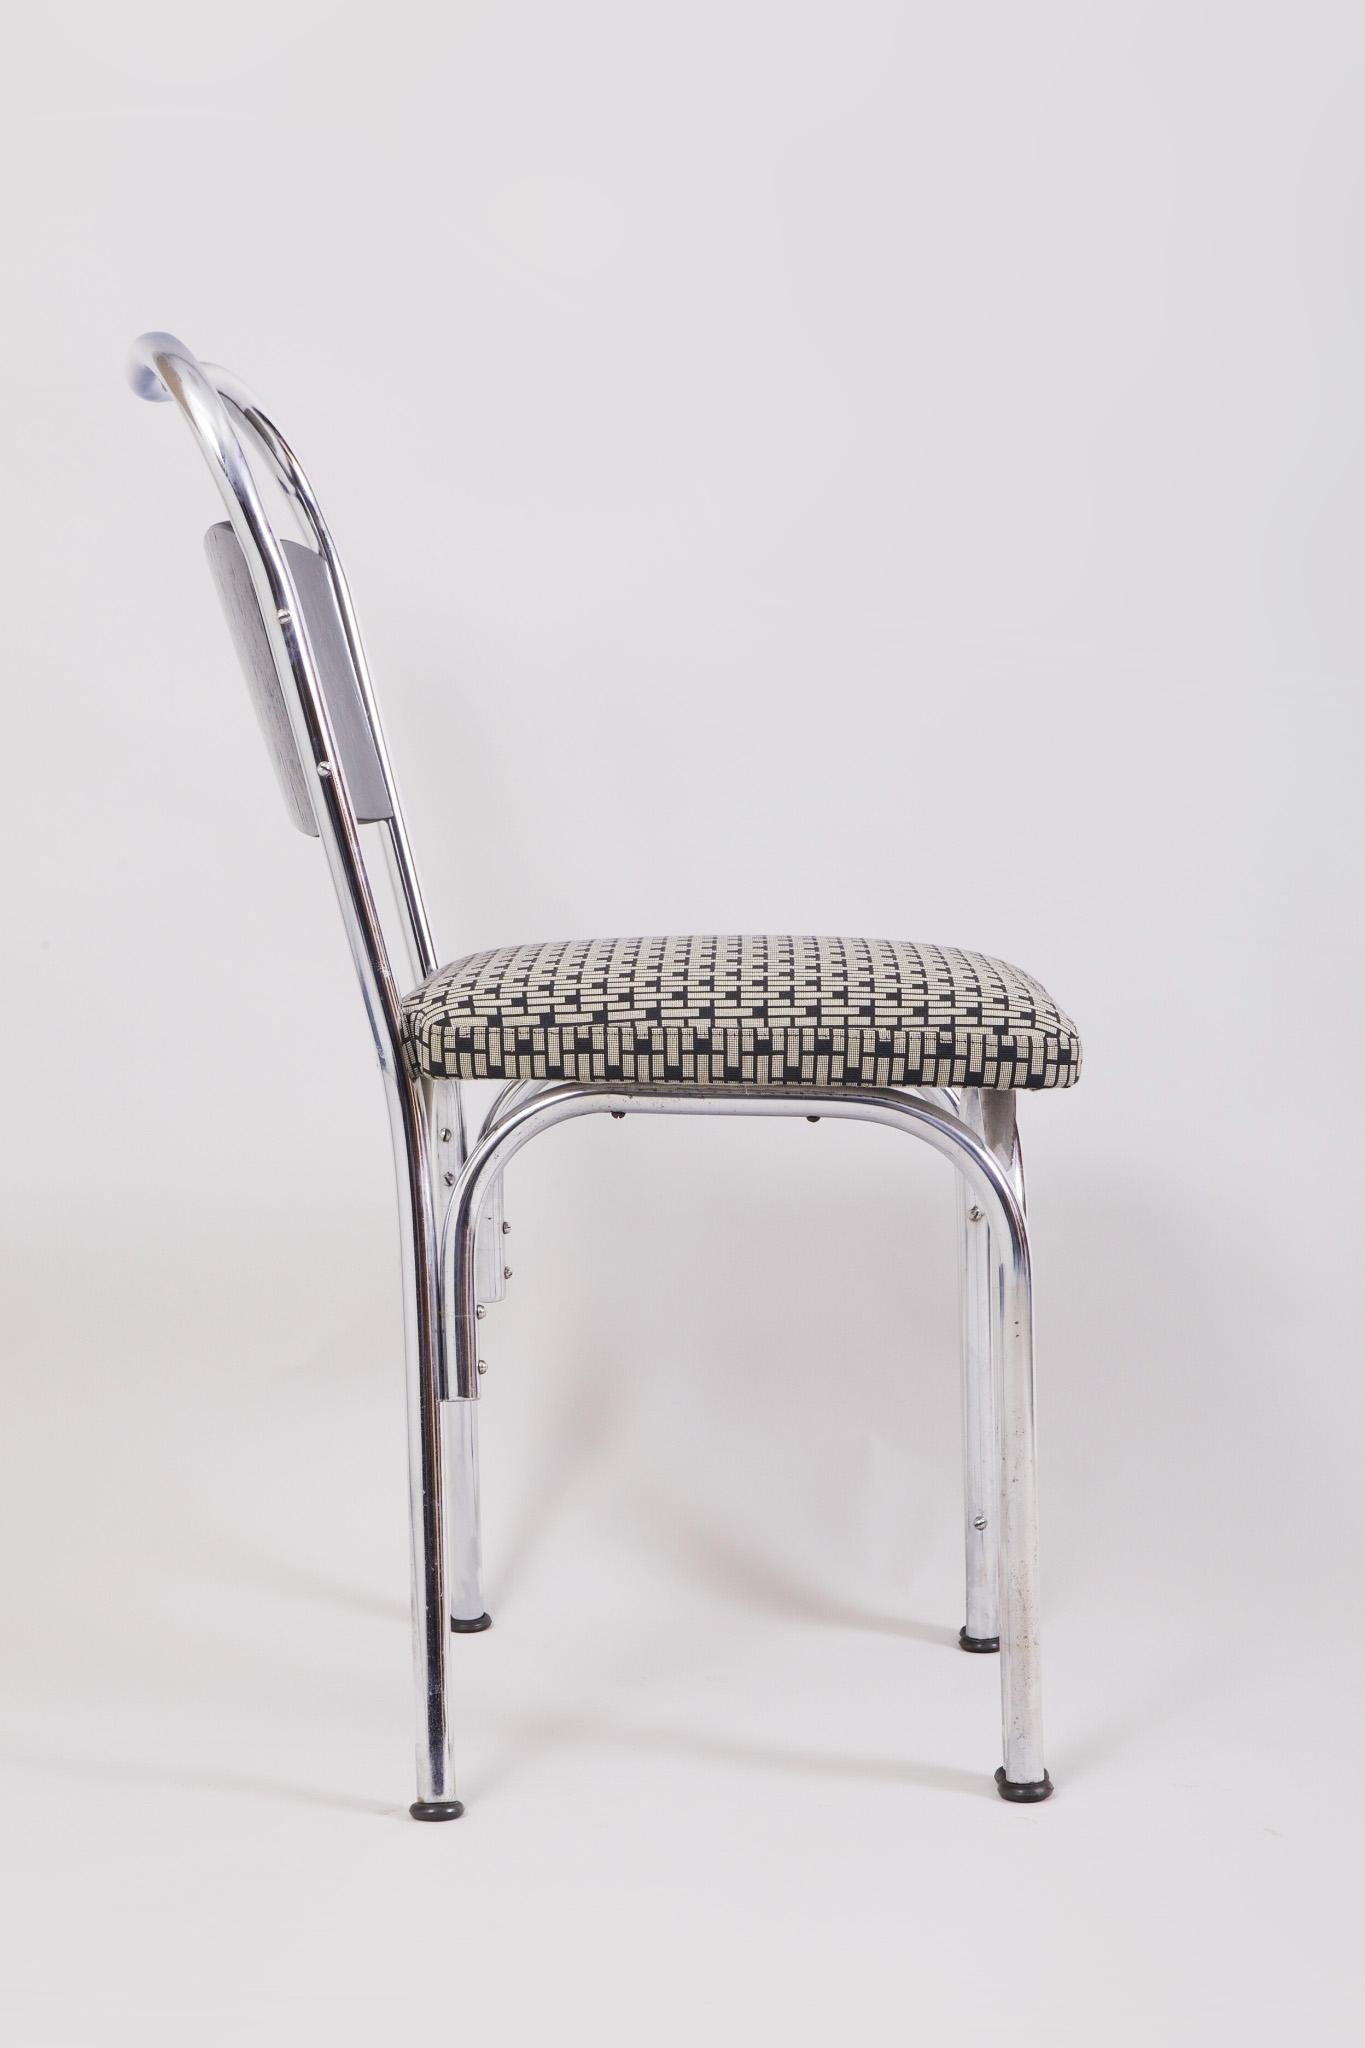 Made in Germany in the 1930s and fully restored and reupholstered by our team.
The chairs belong to the Bauhaus style
They are made out of Oak and chrome plated steel
Upholstered with Backhausen fabric.
The set comes with four chairs.